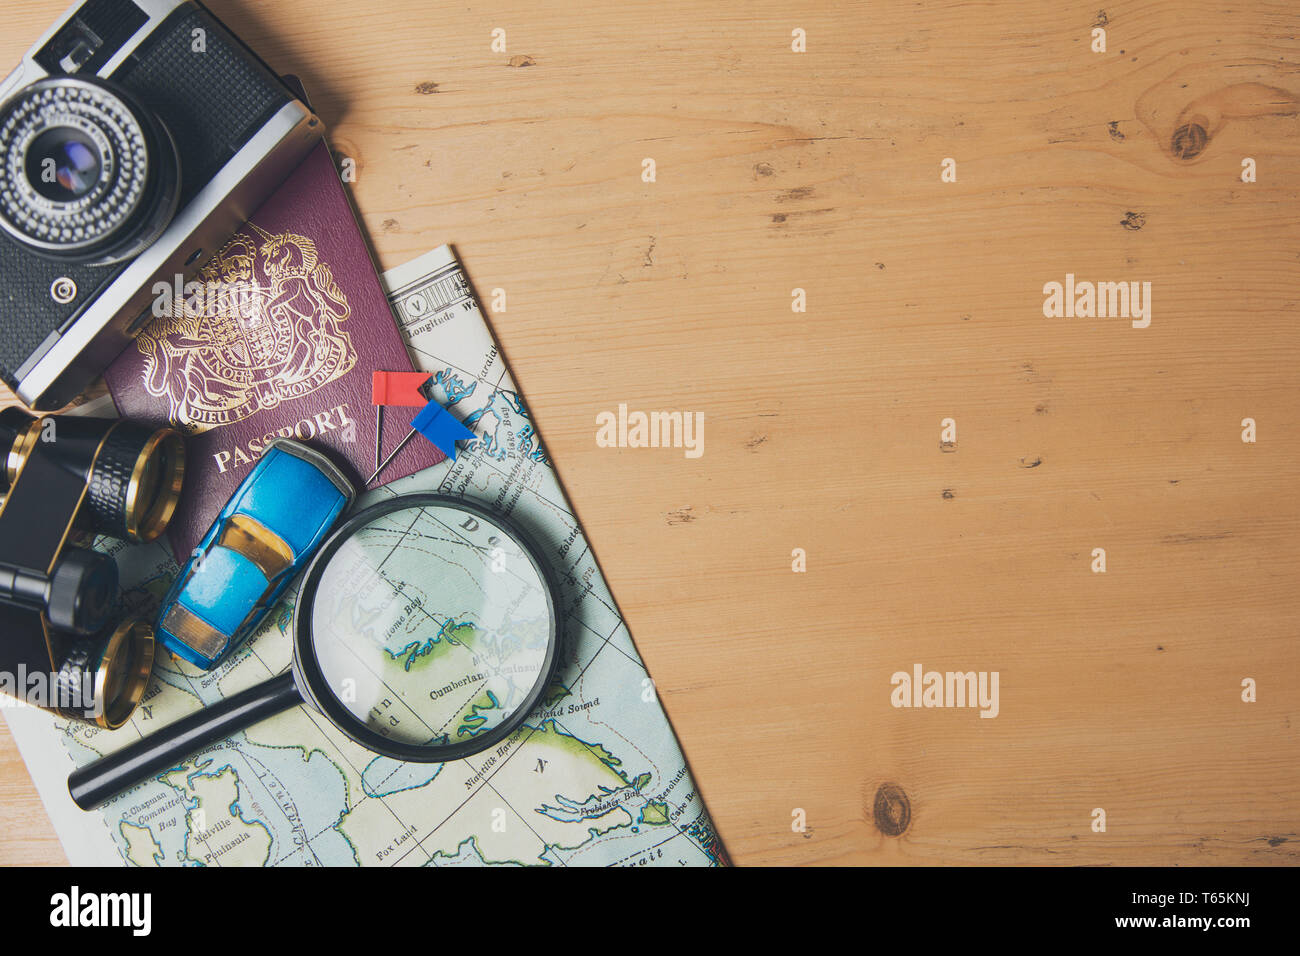 Road trip travel planning background Stock Photo